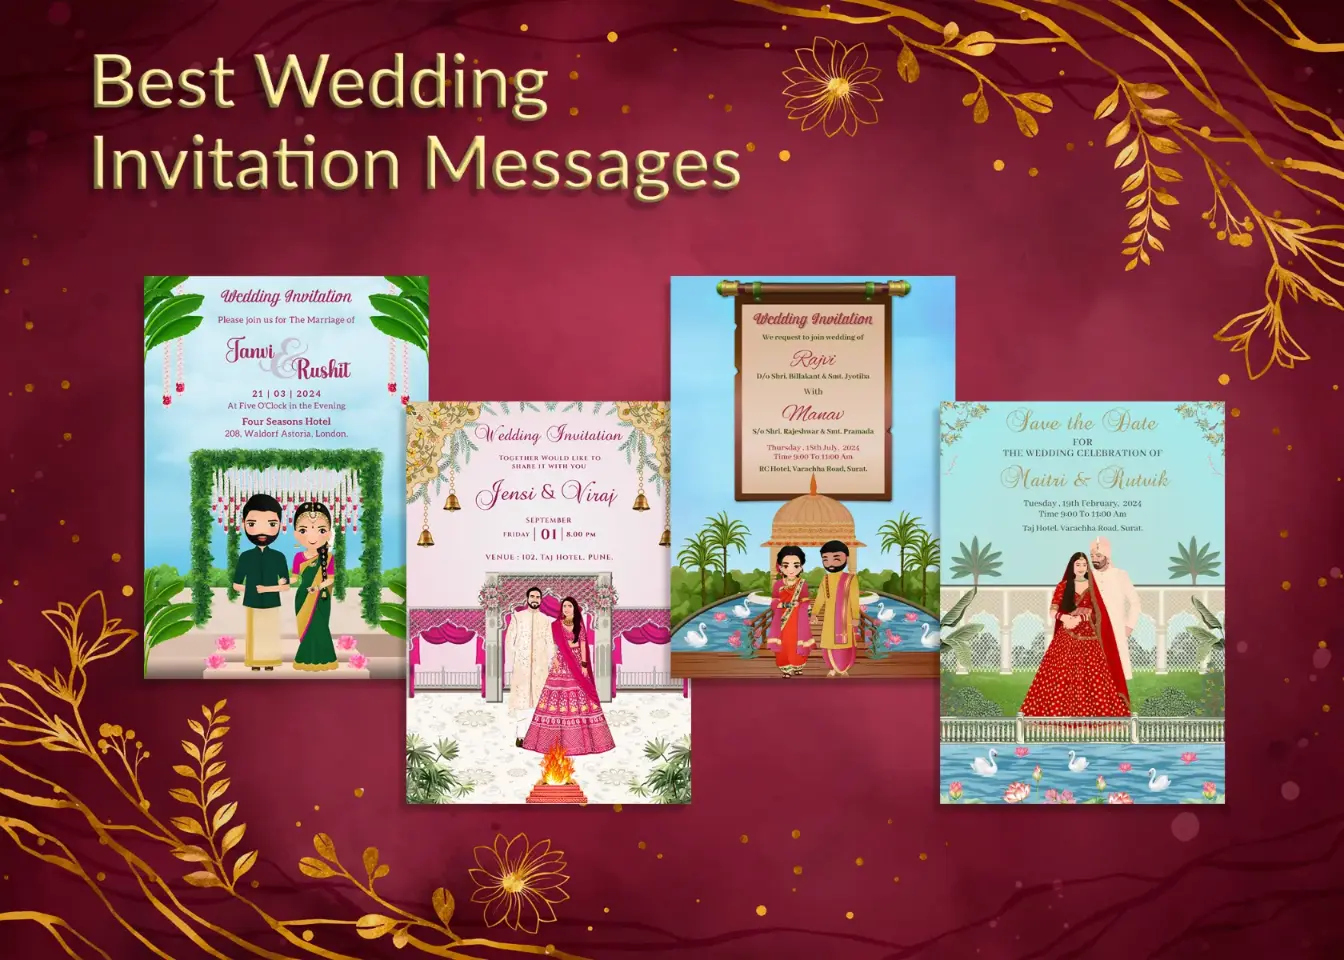 Best Wedding Invitation Messages to Delight Your Guests